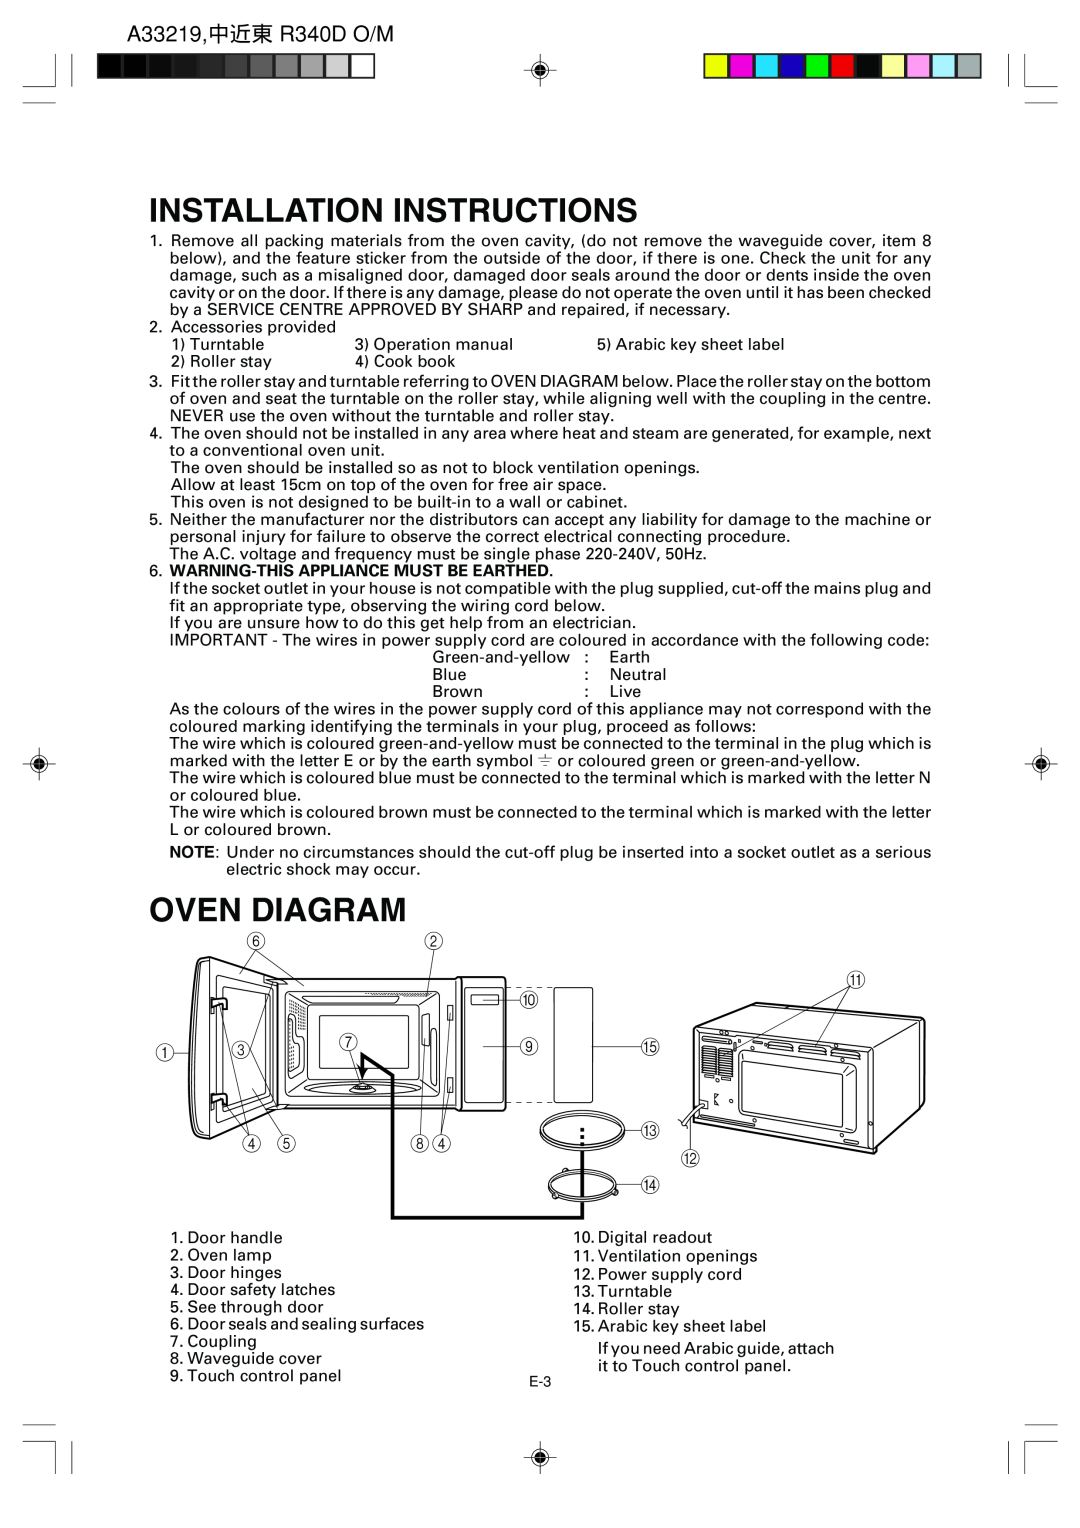 Sharp R-340D Installation Instructions, Oven Diagram, Warning-Thisappliance Must Be Earthed, A33219,中近東 R340D O/M 